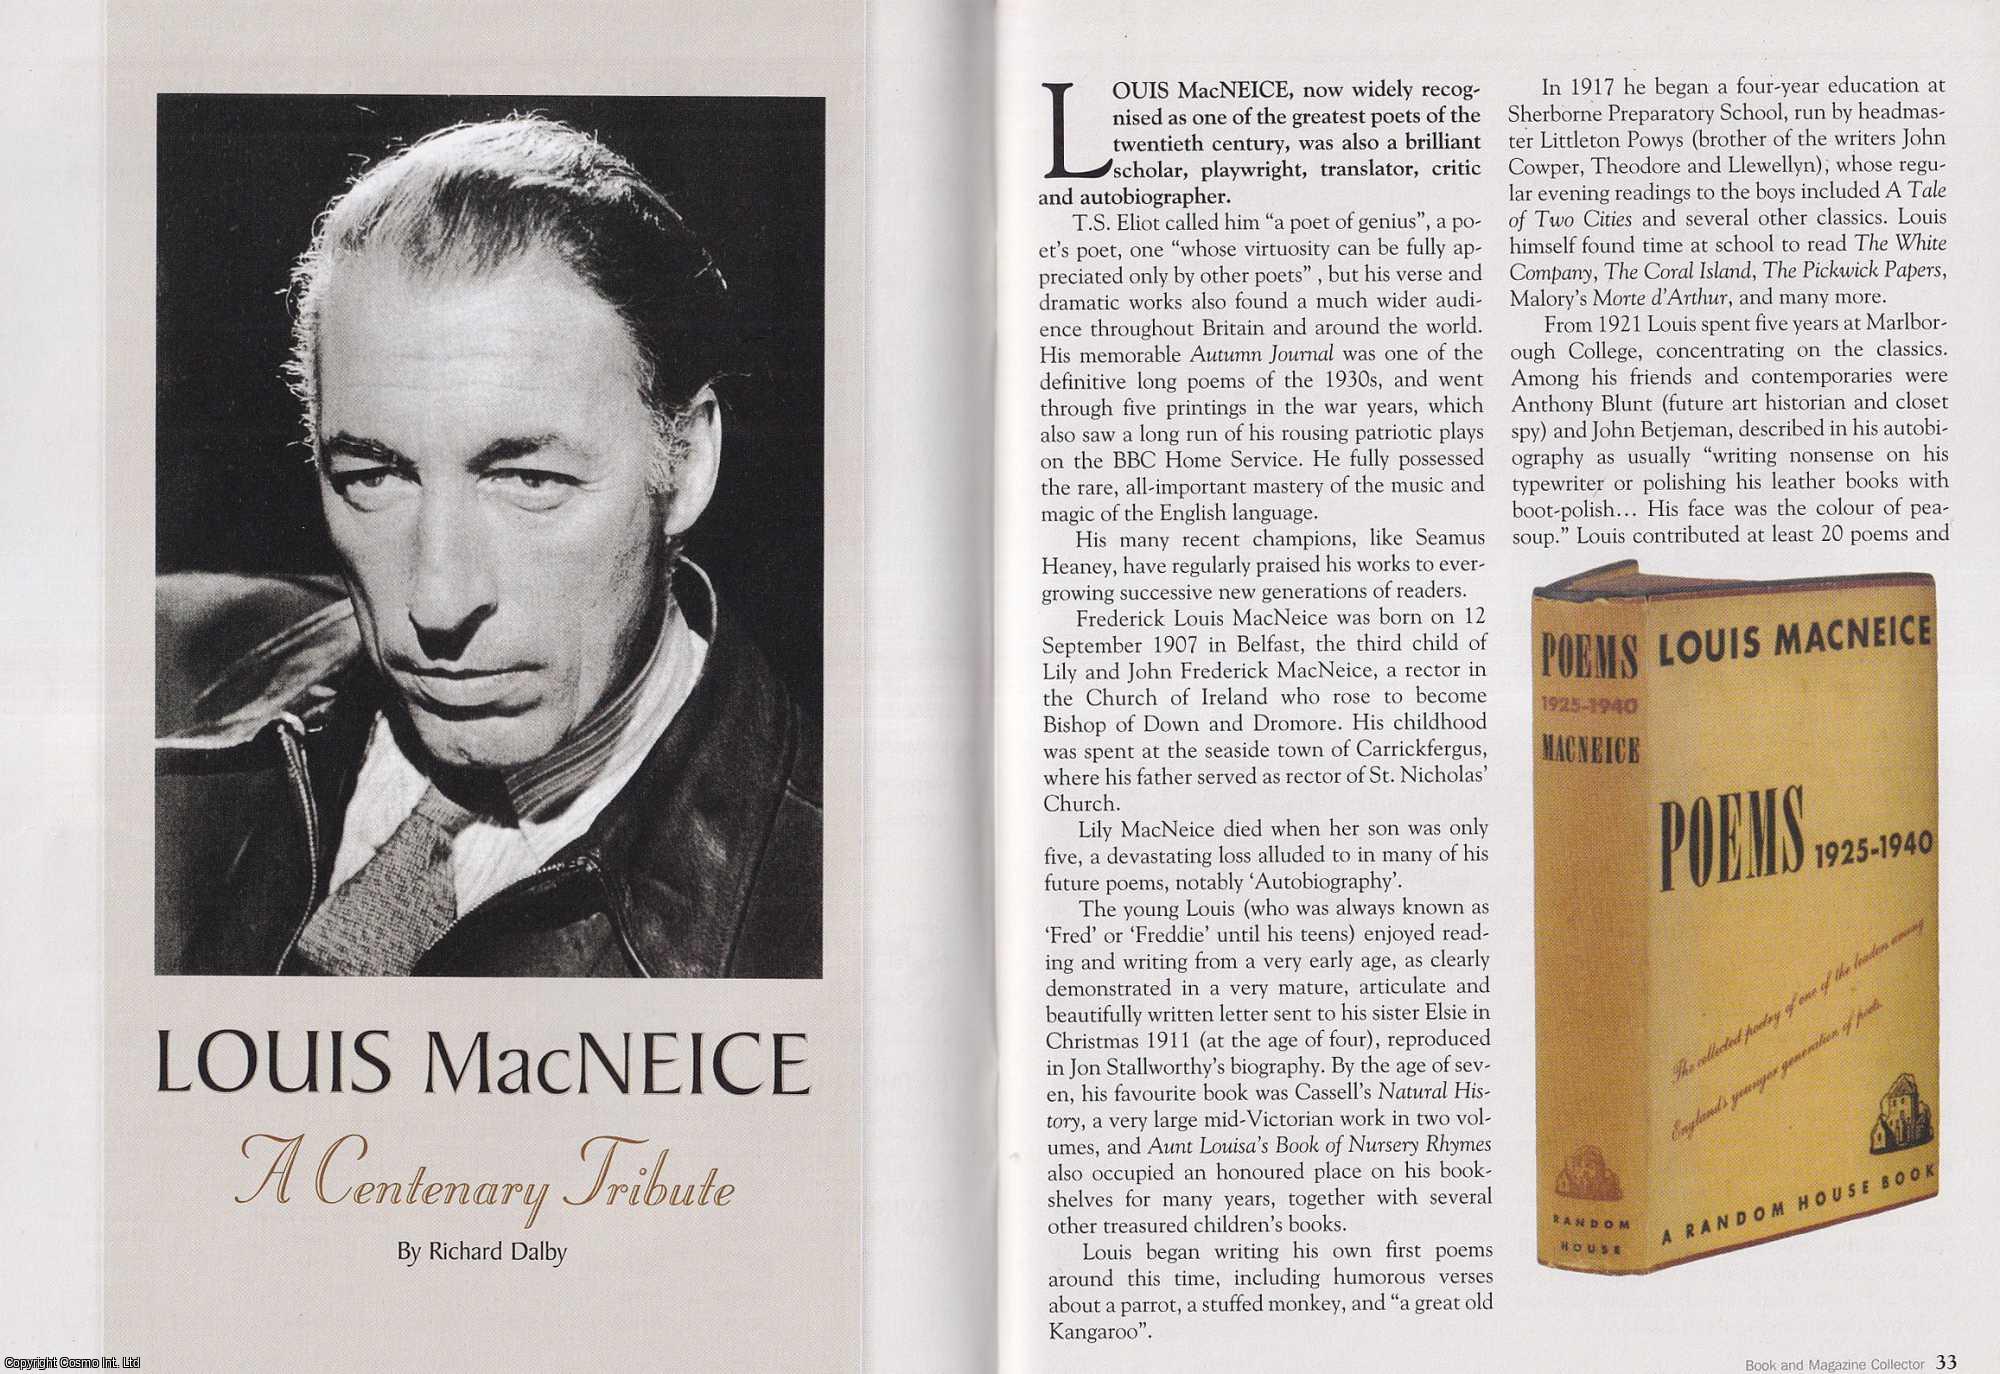 Richard Dalby - Louis MacNeice. A Centenary Tribute. This is an original article separated from an issue of The Book & Magazine Collector publication, 2007.